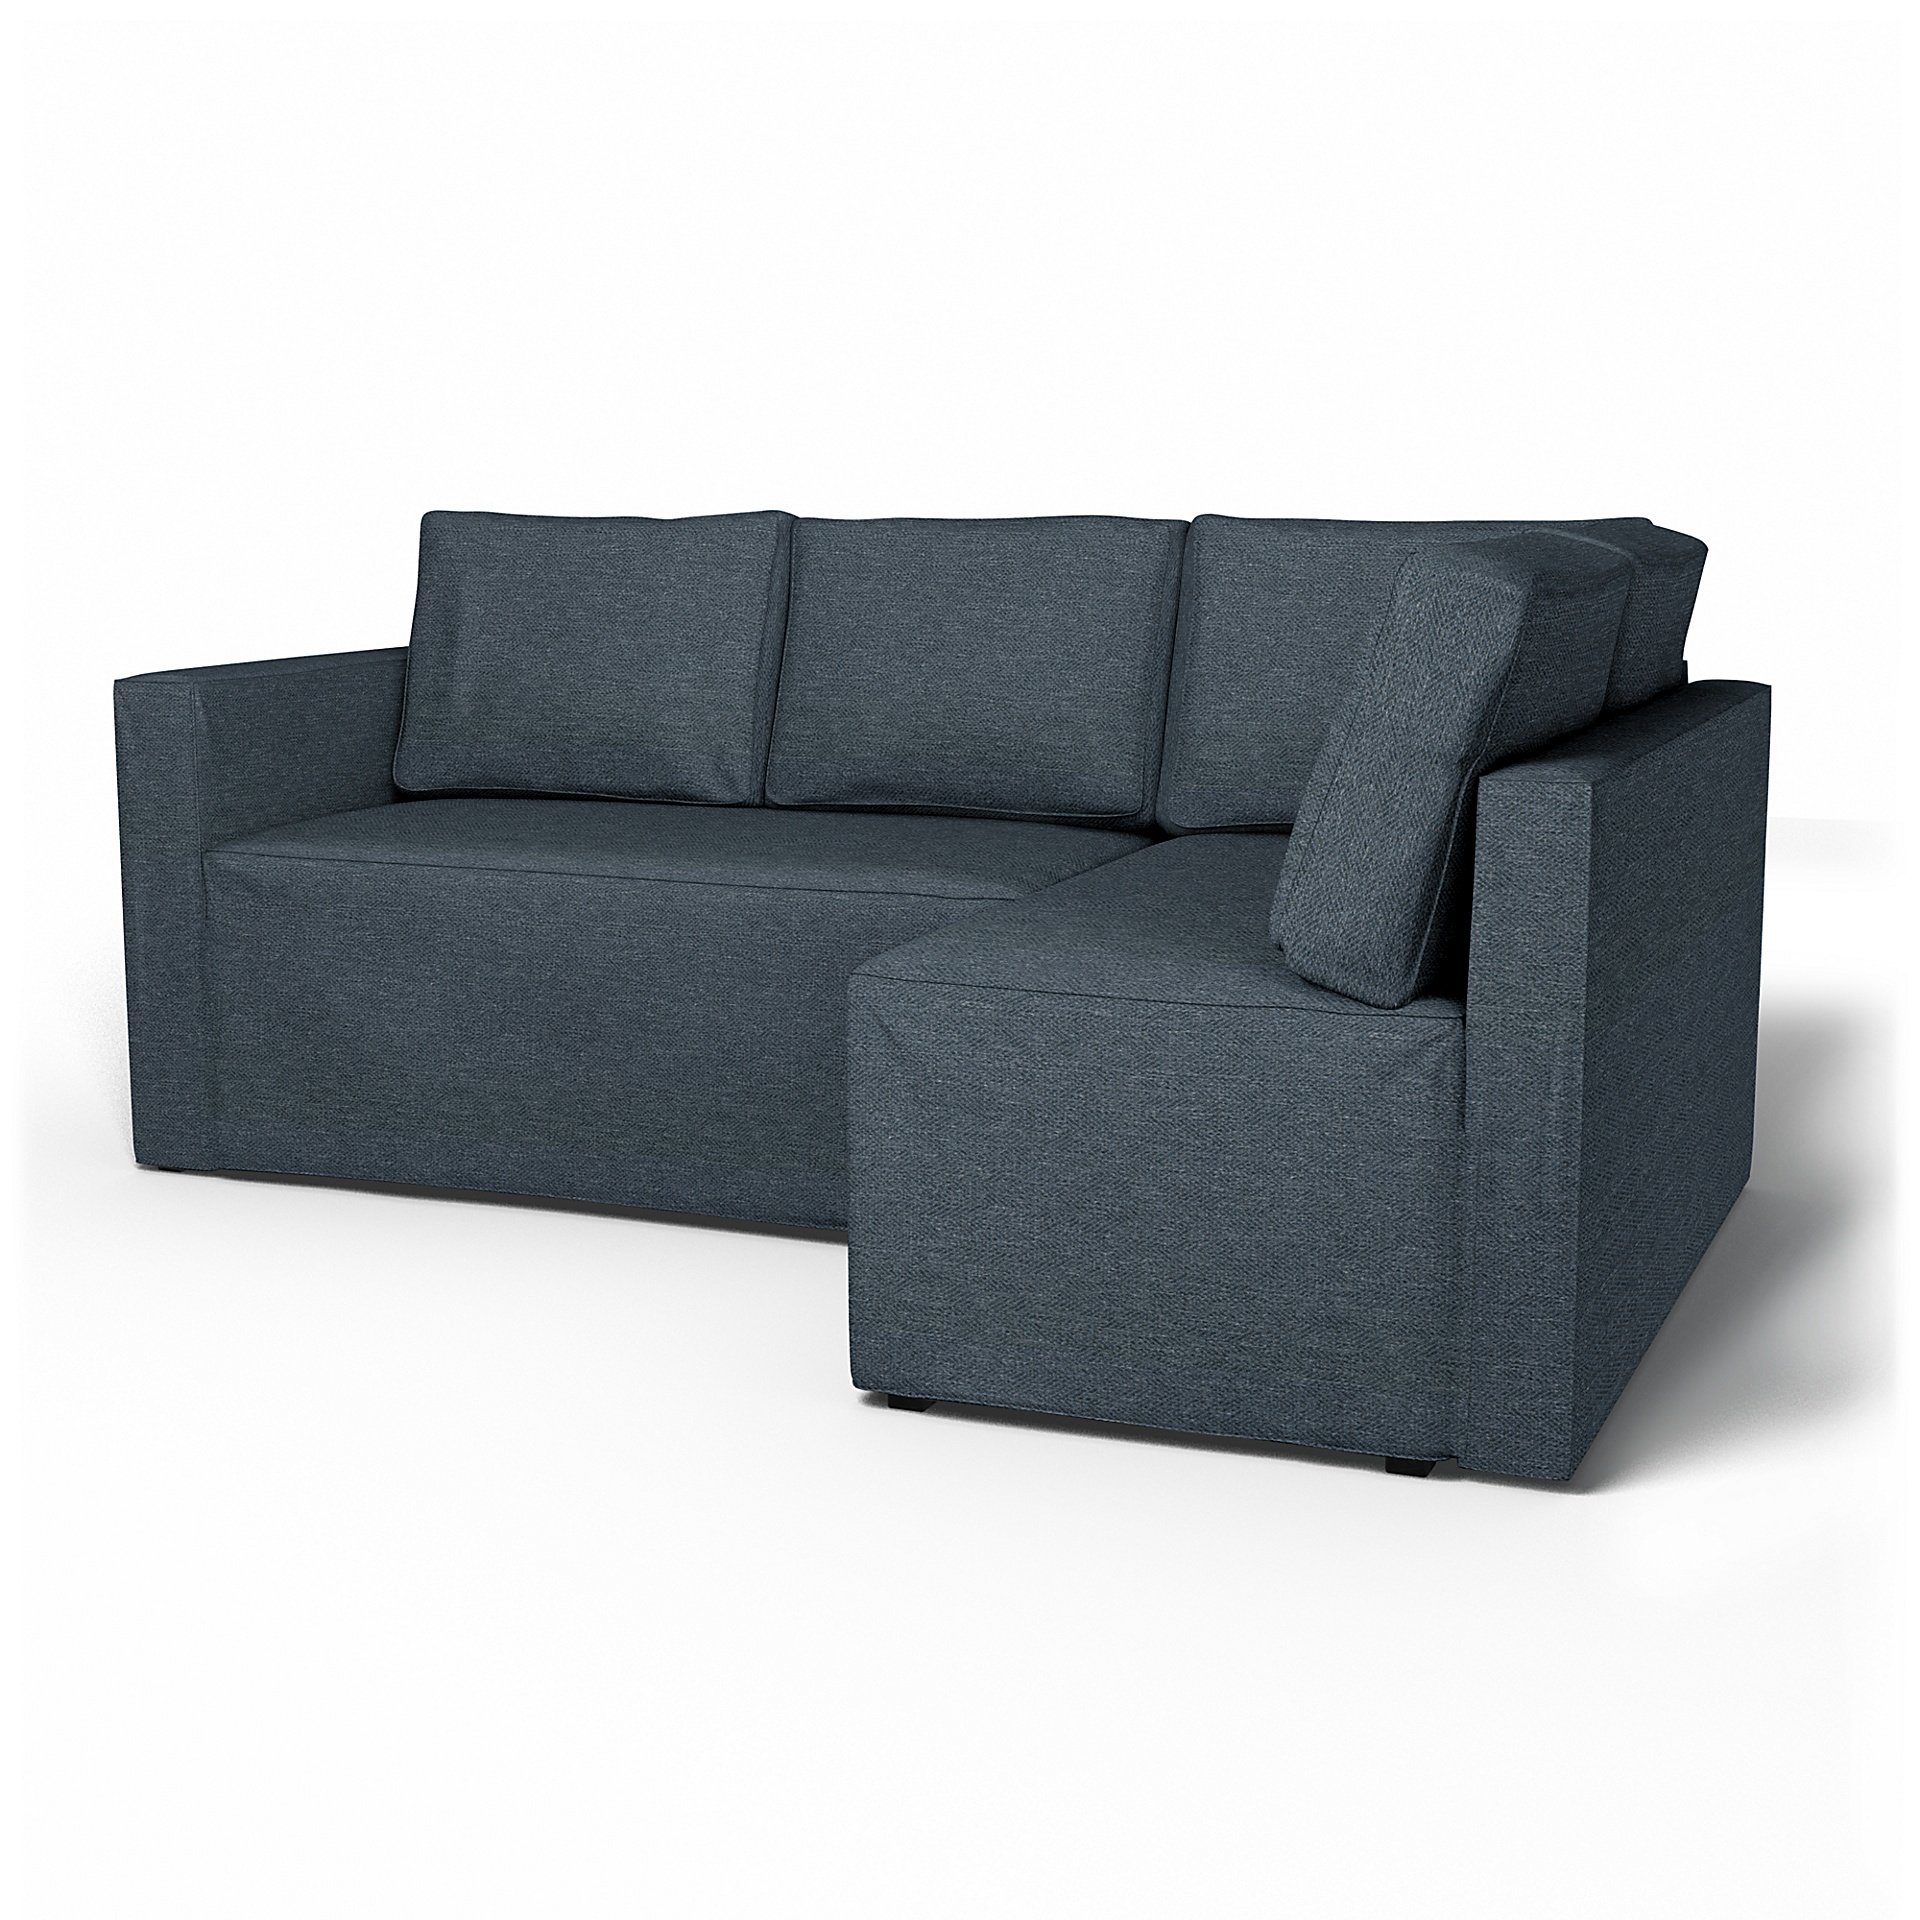 IKEA - Fagelbo Sofa Bed with Right Chaise Cover, Denim, Boucle & Texture - Bemz